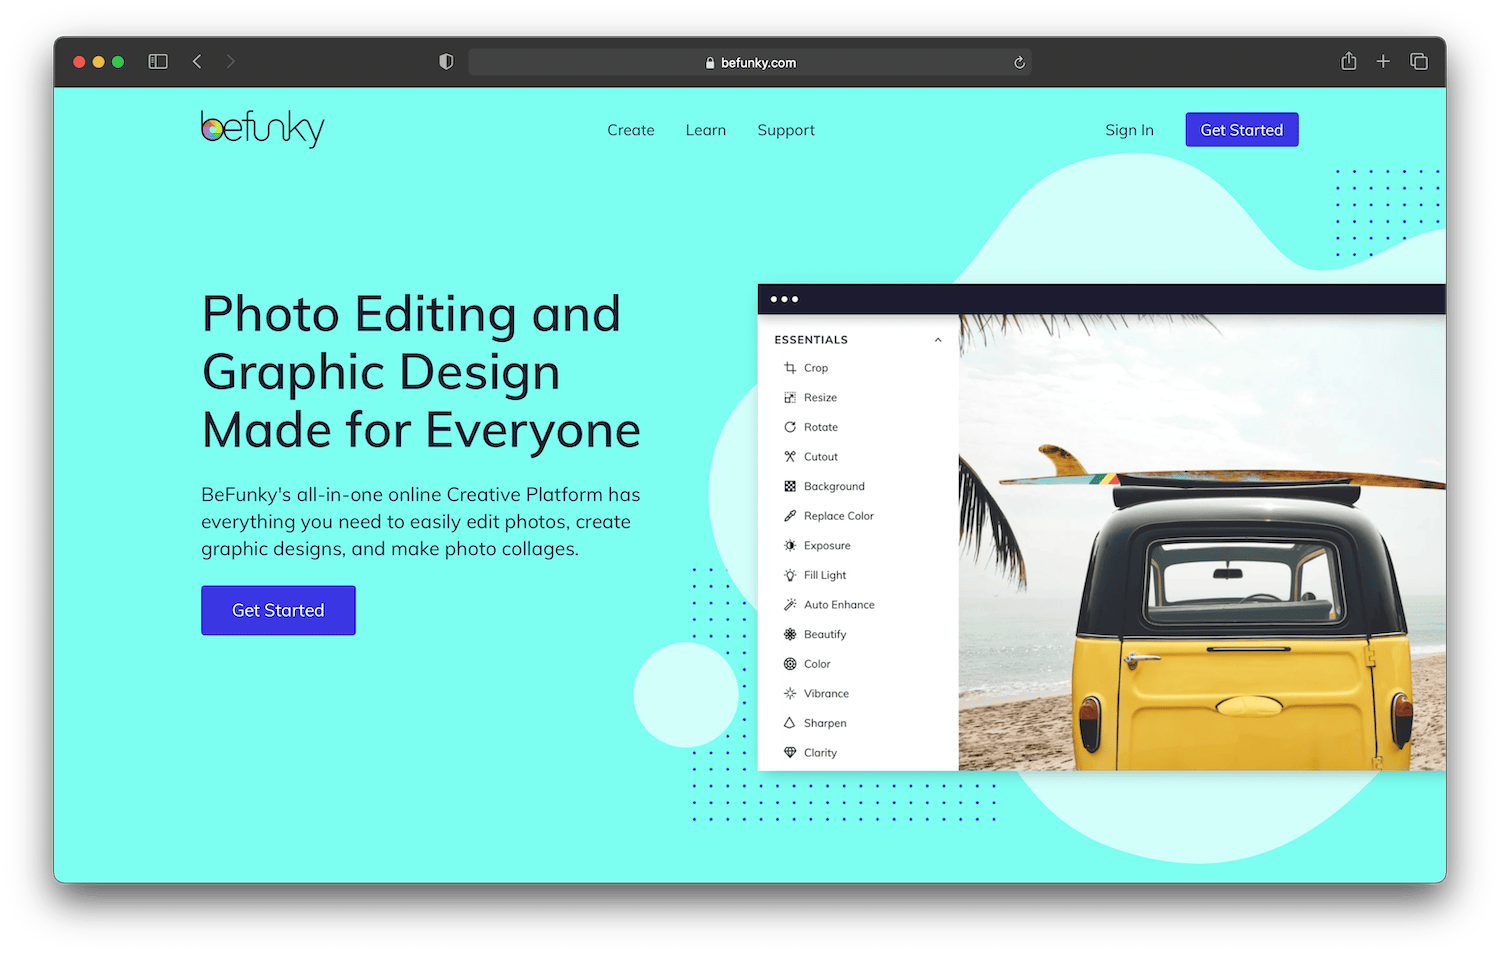 The Full Guide to AI Image Editors: Top Tools & Reviews